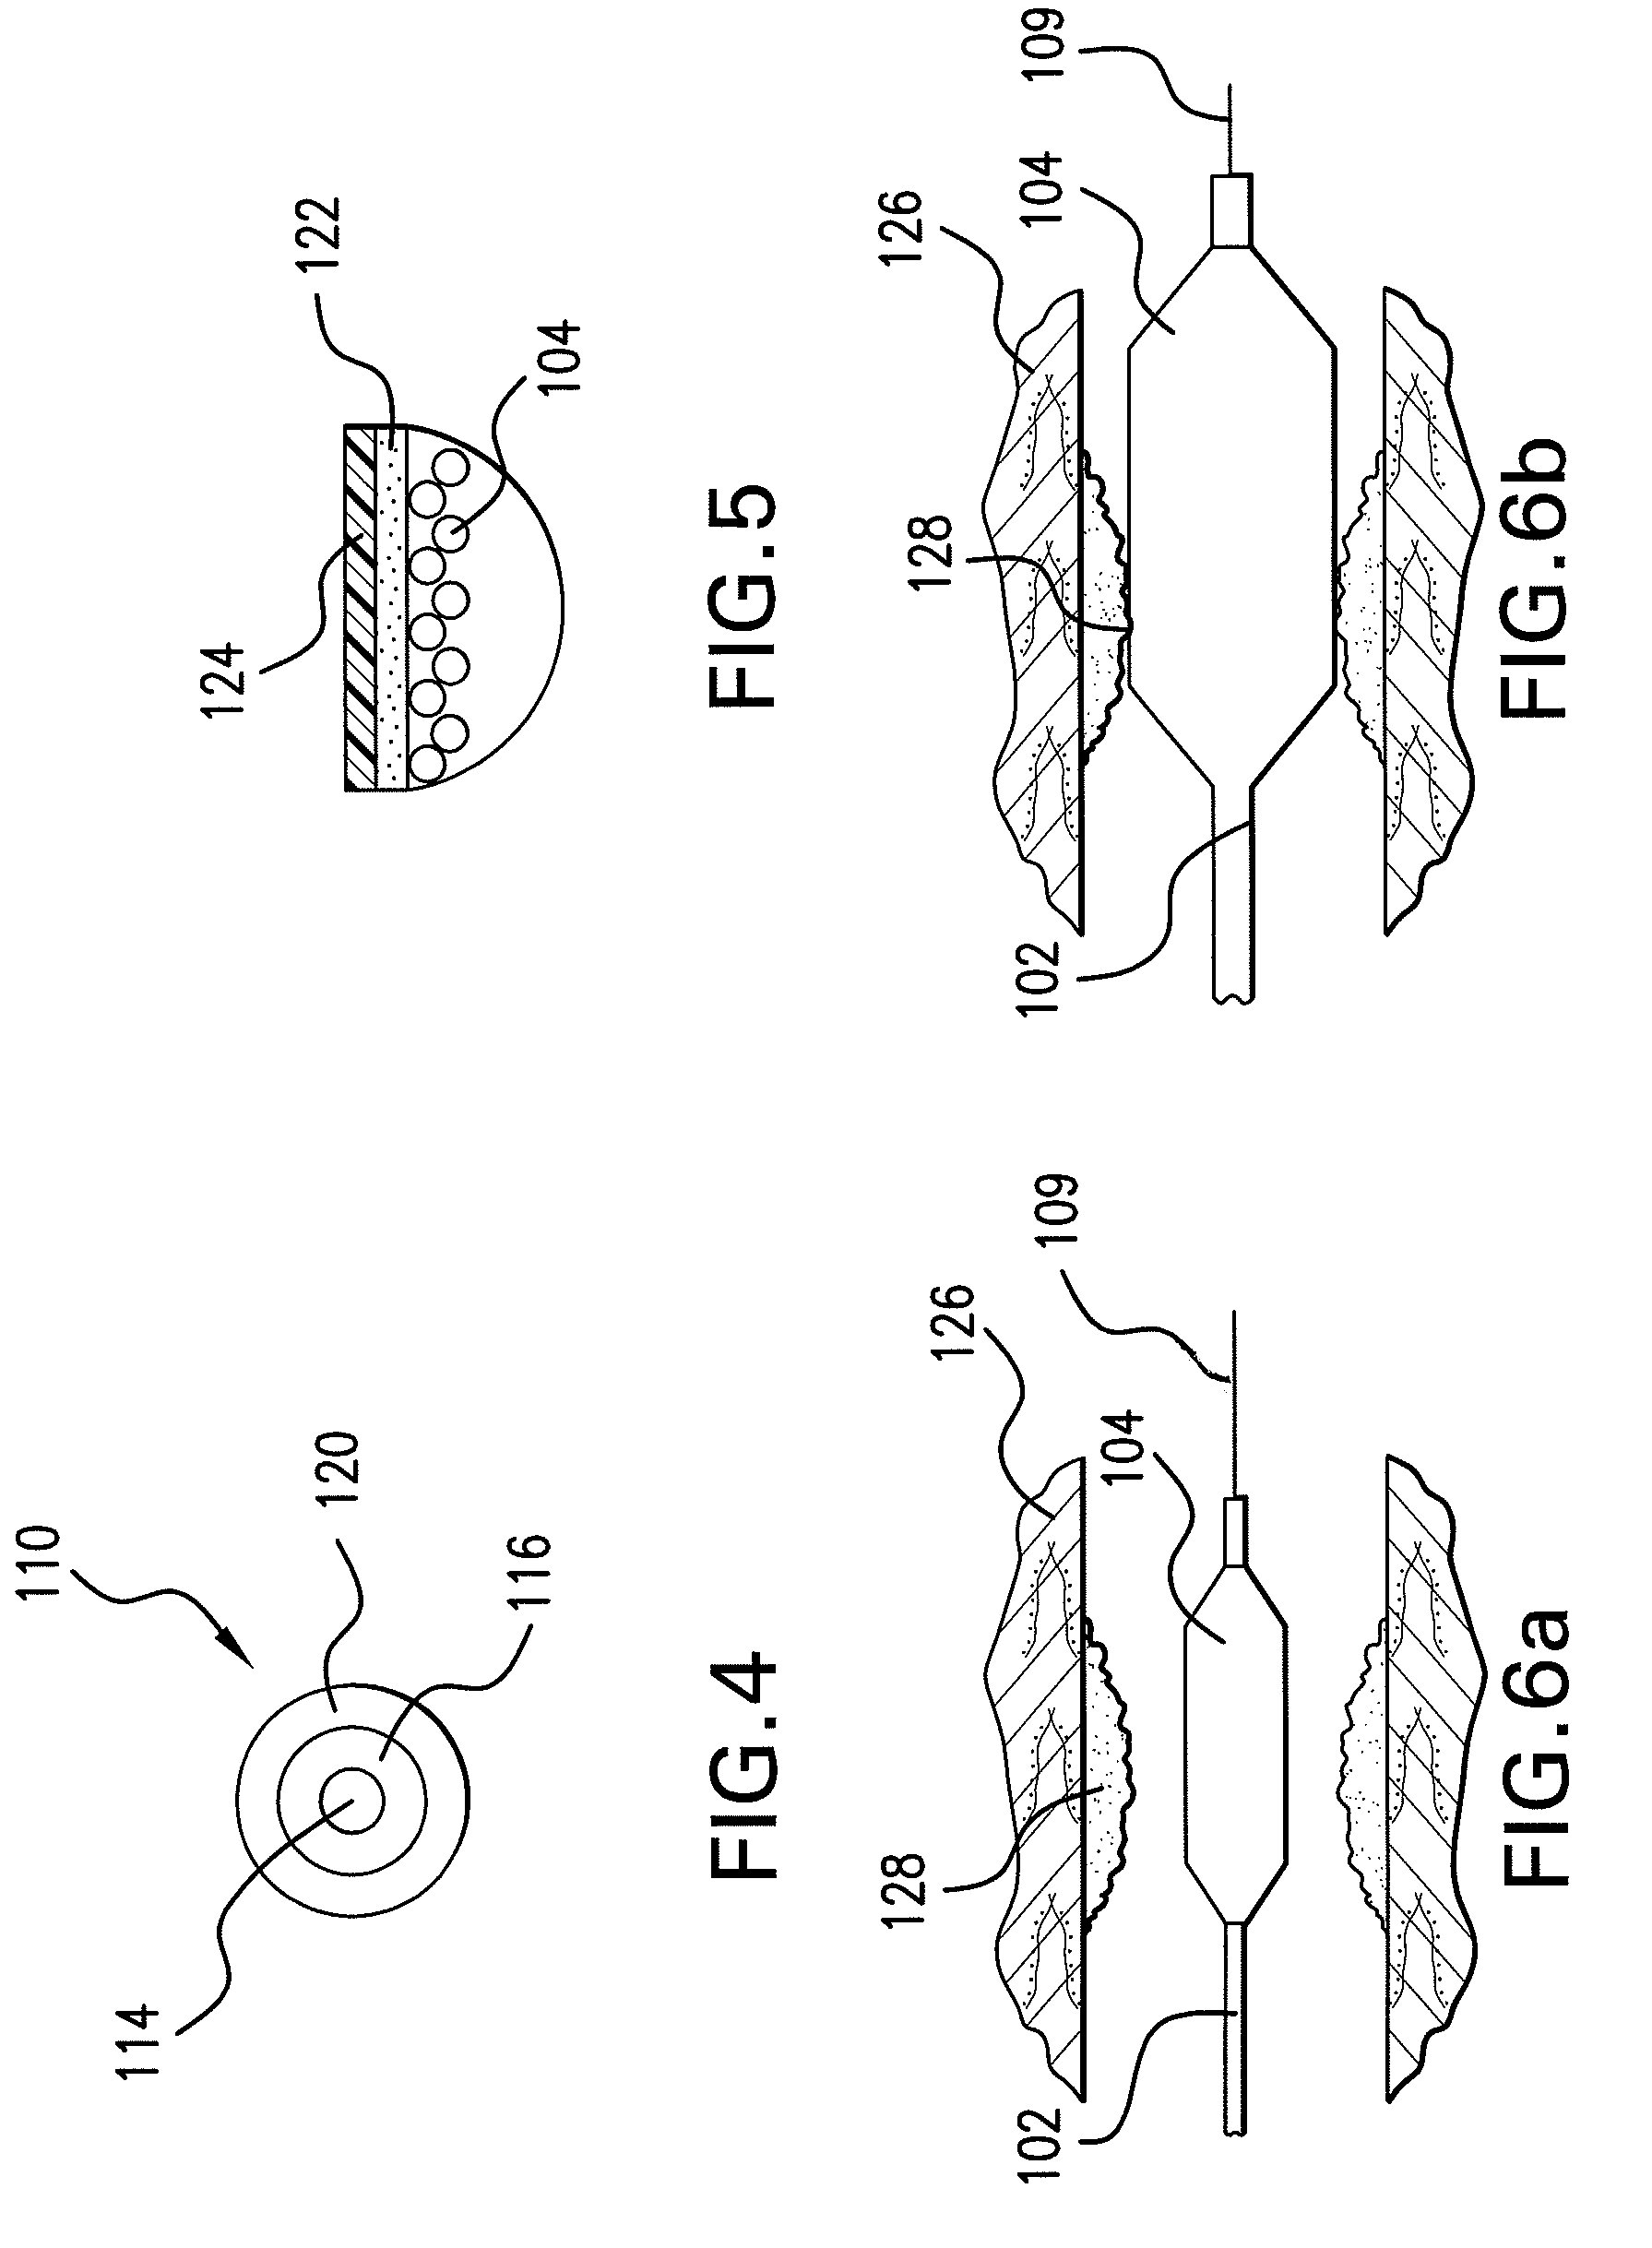 Expandable Member Formed Of A Fibrous Matrix For Intraluminal Drug Delivery